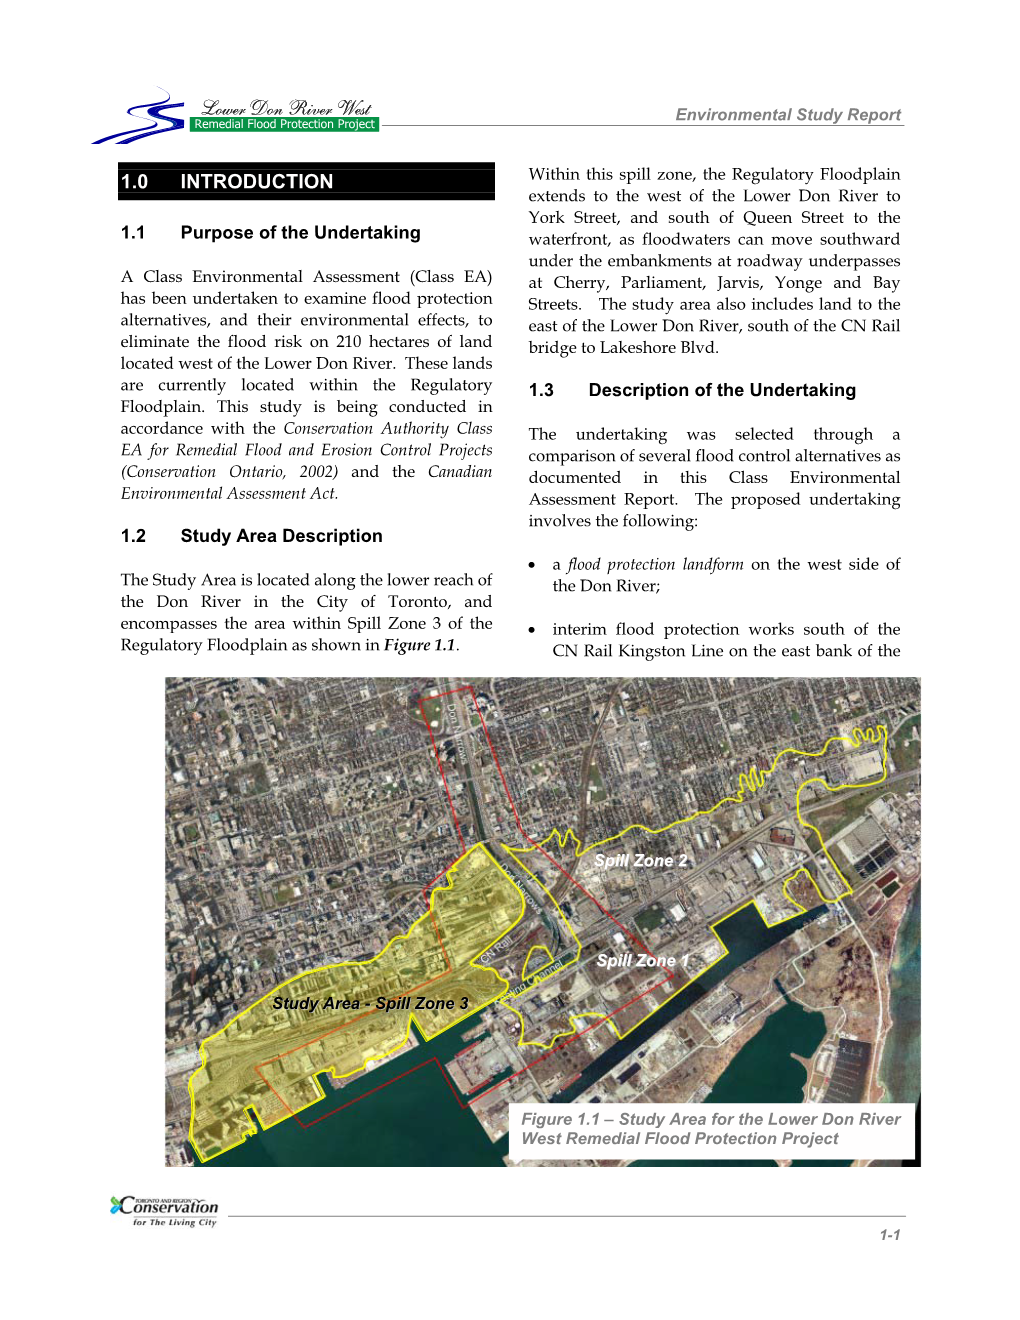 Lower Don River West Environmental Study Report Remedial Flood Protection Project